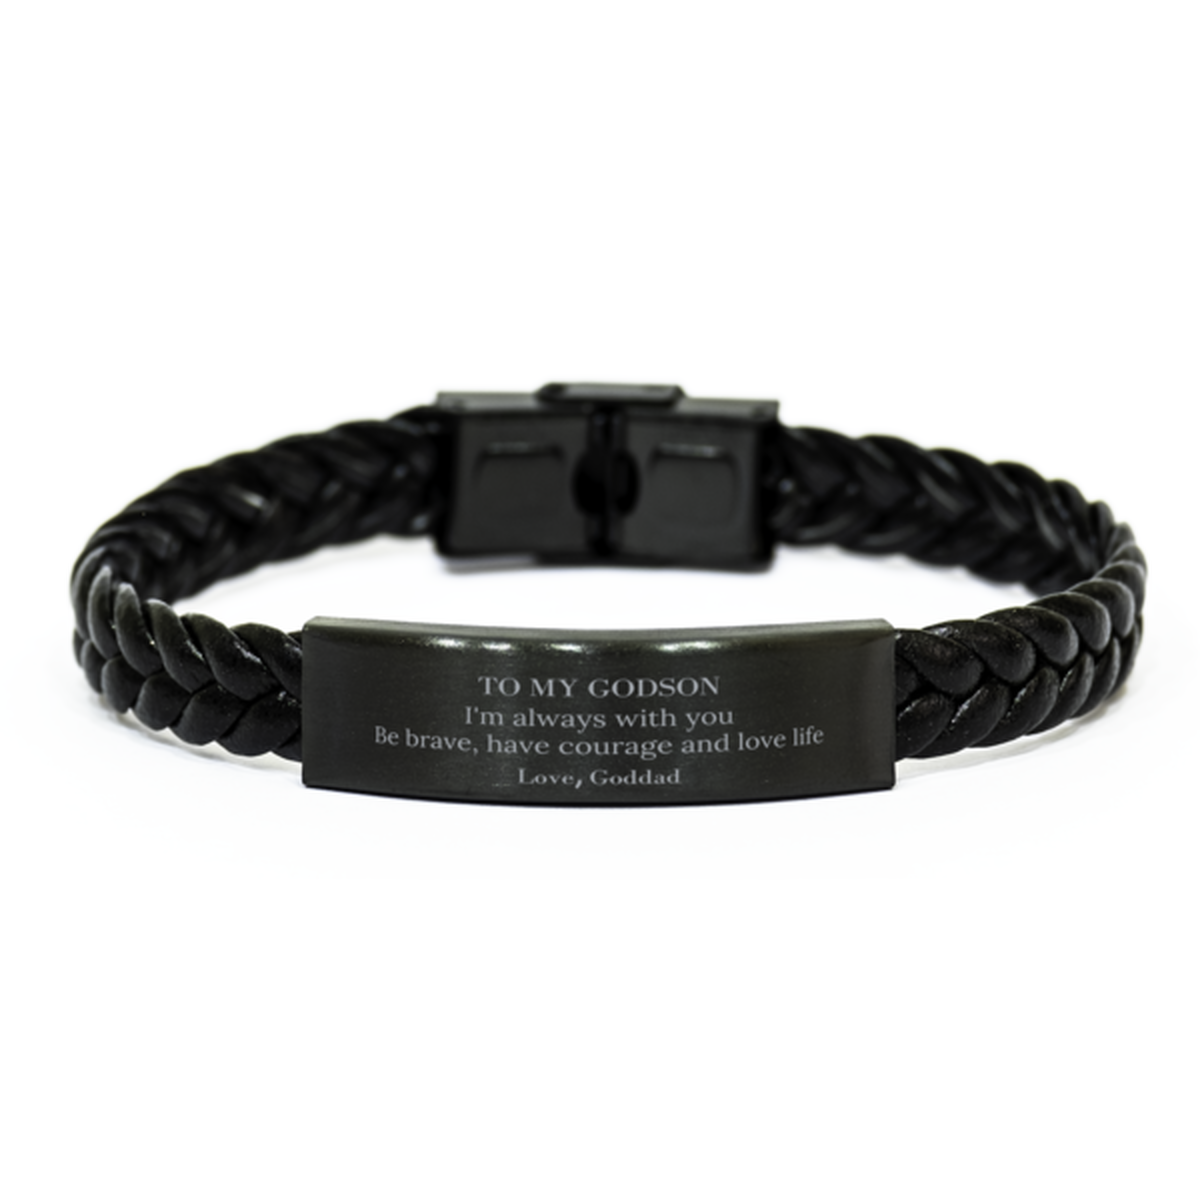 To My Godson Gifts from Goddad, Unique Braided Leather Bracelet Inspirational Christmas Birthday Graduation Gifts for Godson I'm always with you. Be brave, have courage and love life. Love, Goddad